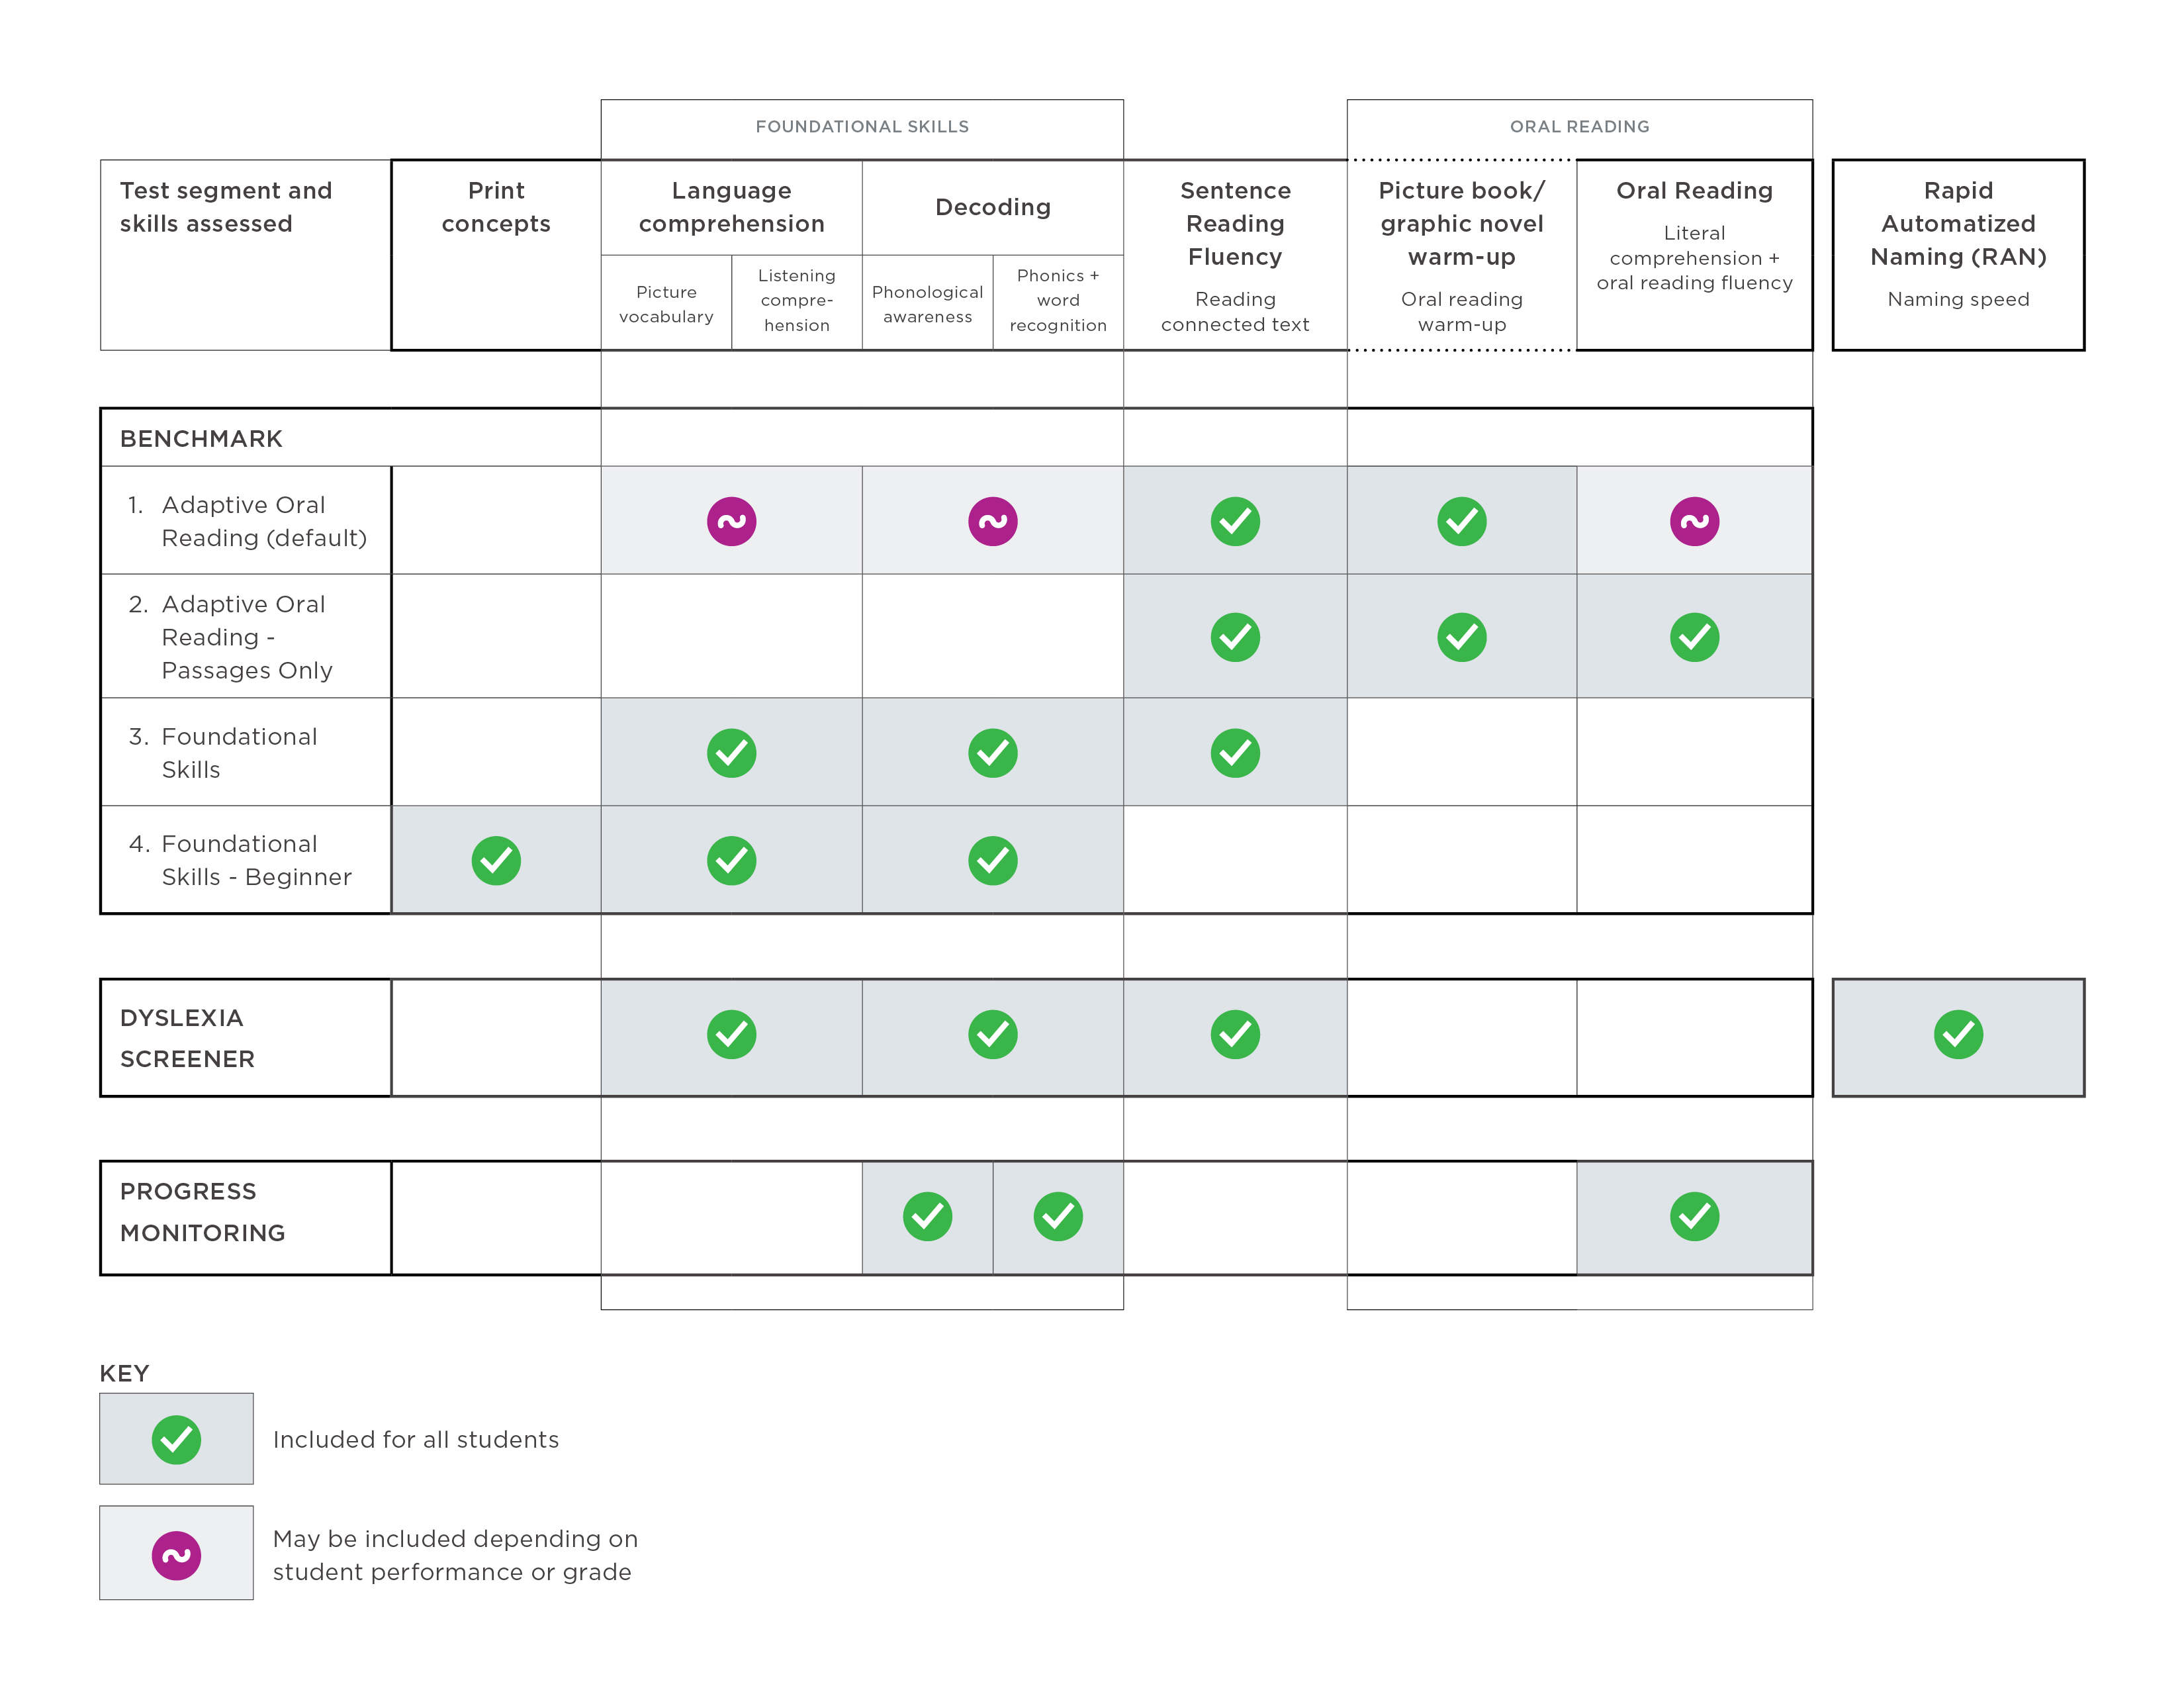 Table of skills assessed with MAP Reading Fluency along with the test types that measure those skills